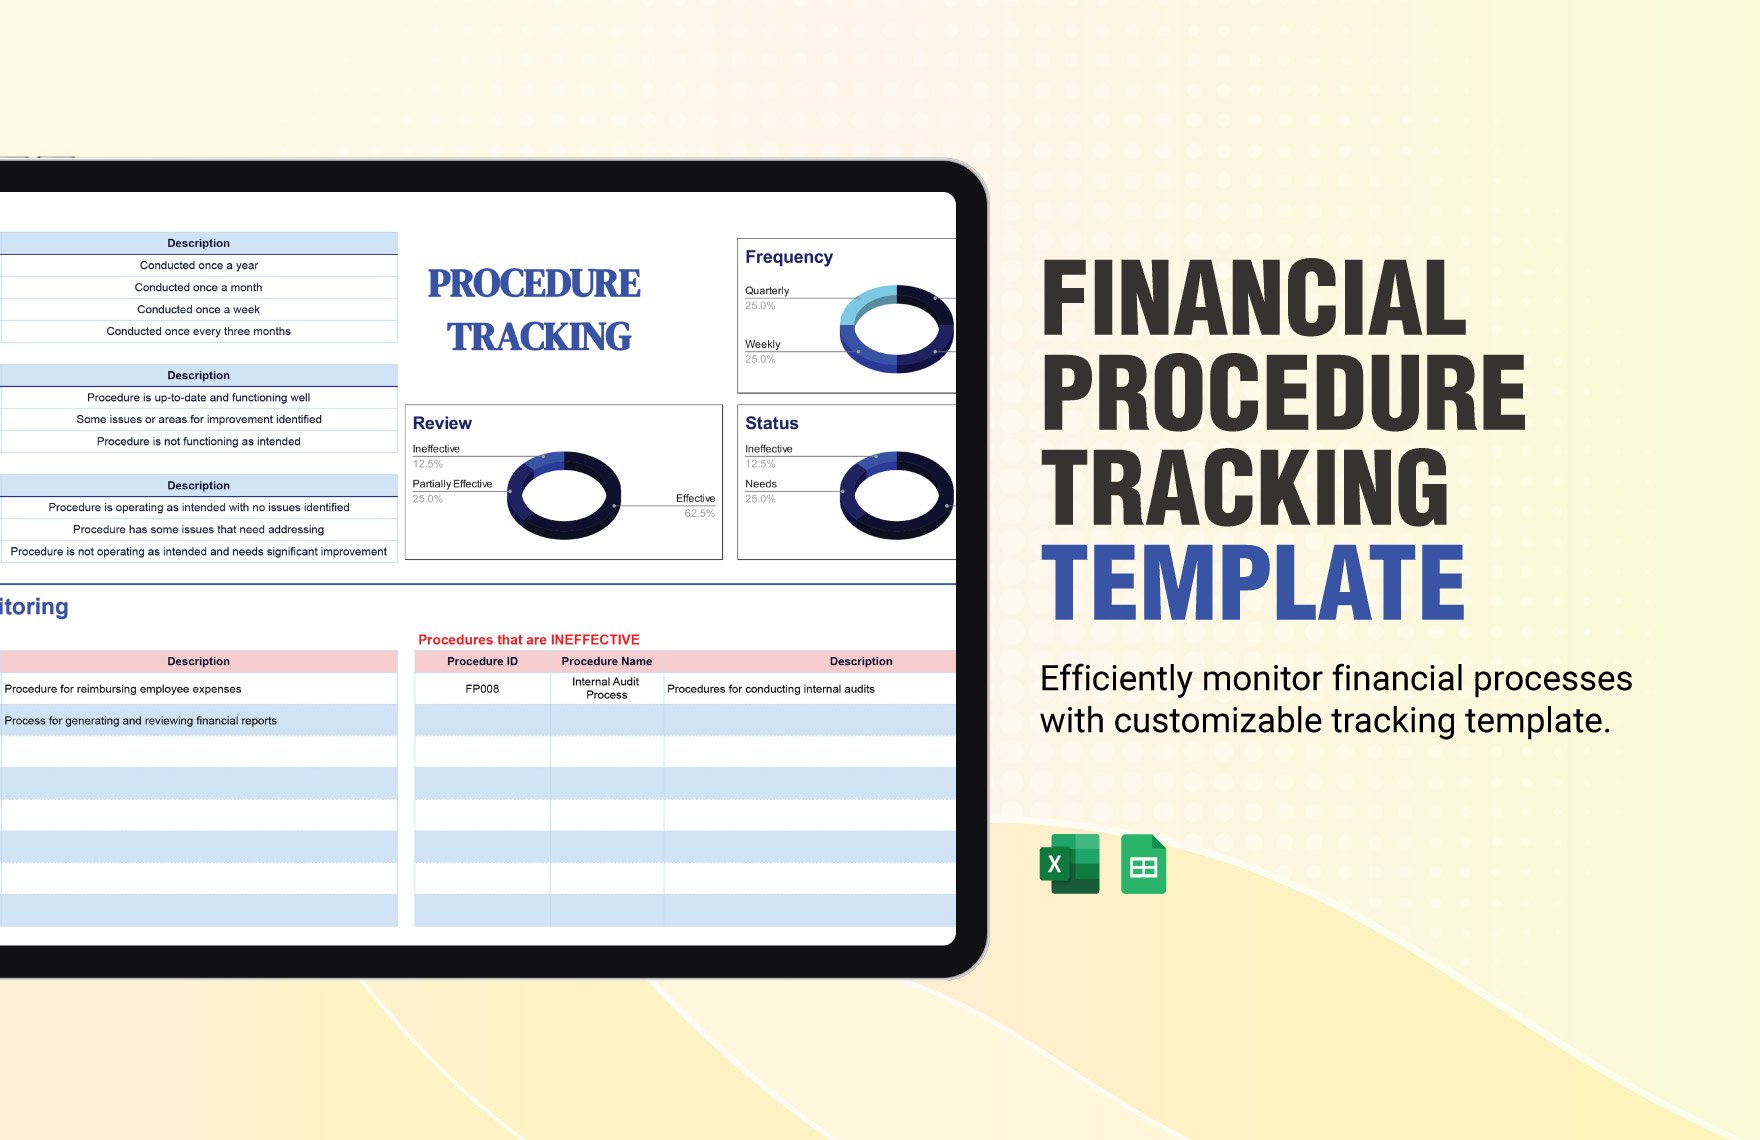 Financial Procedure Tracking Template in Excel, Google Sheets